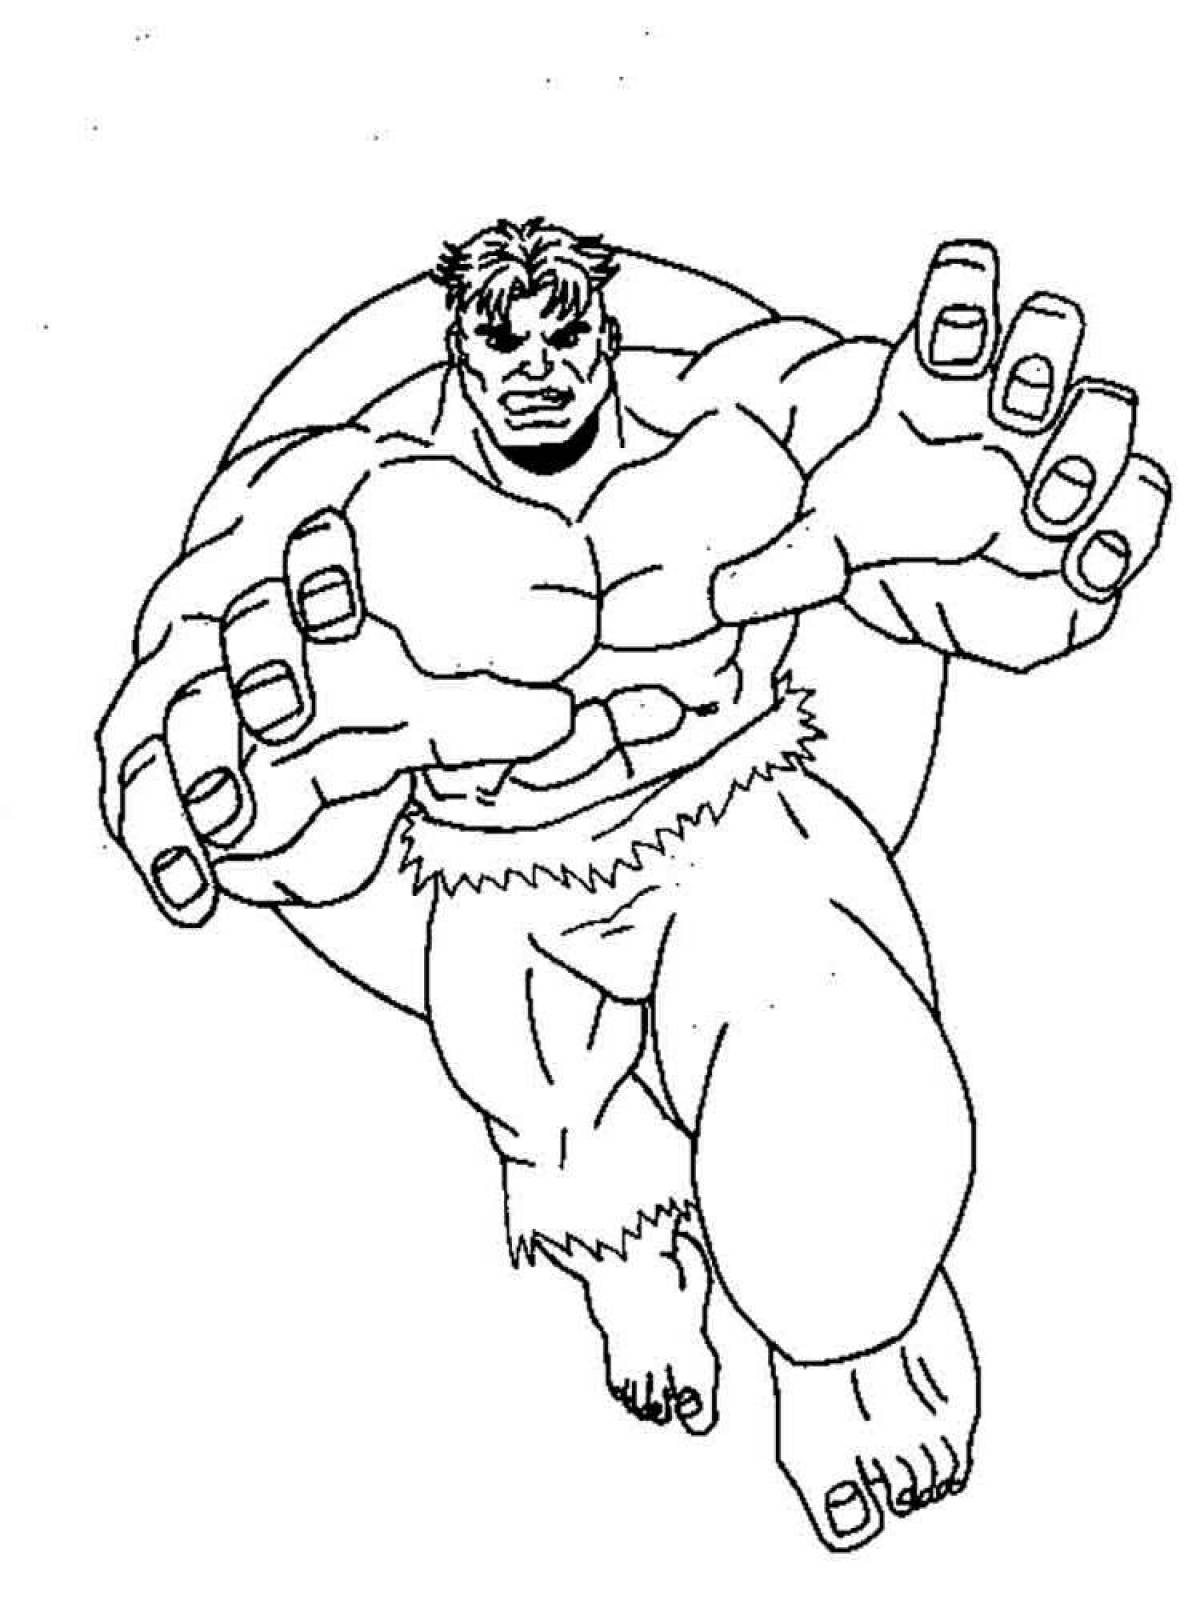 Colorful superheroes coloring pages for kids